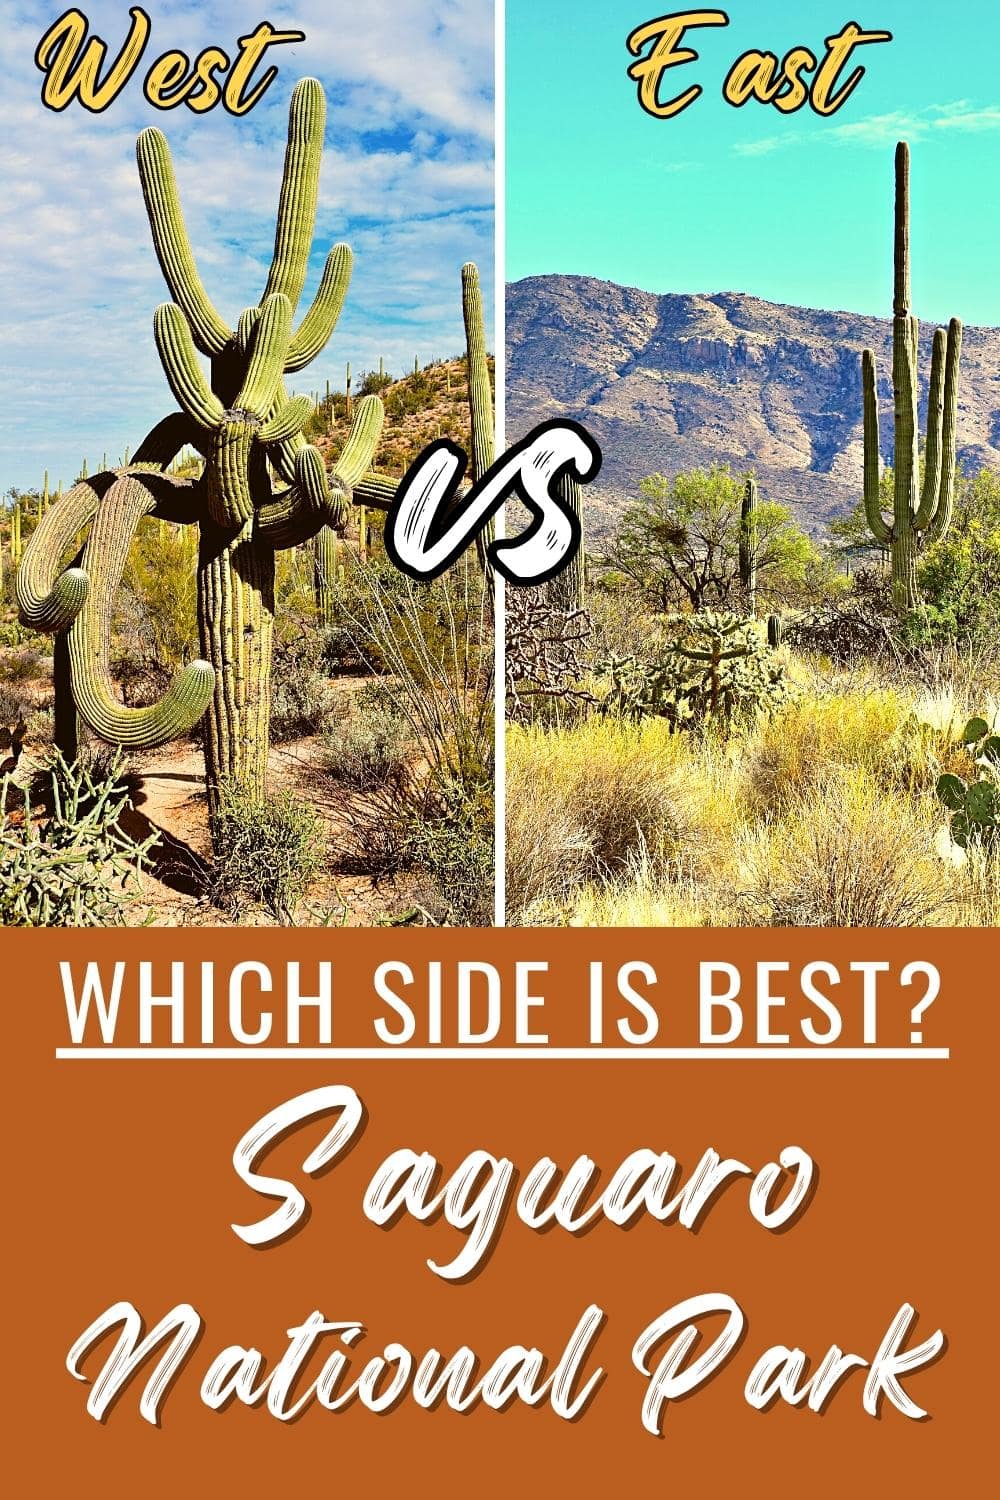 Saguaro National Park East vs West: Which is Better?